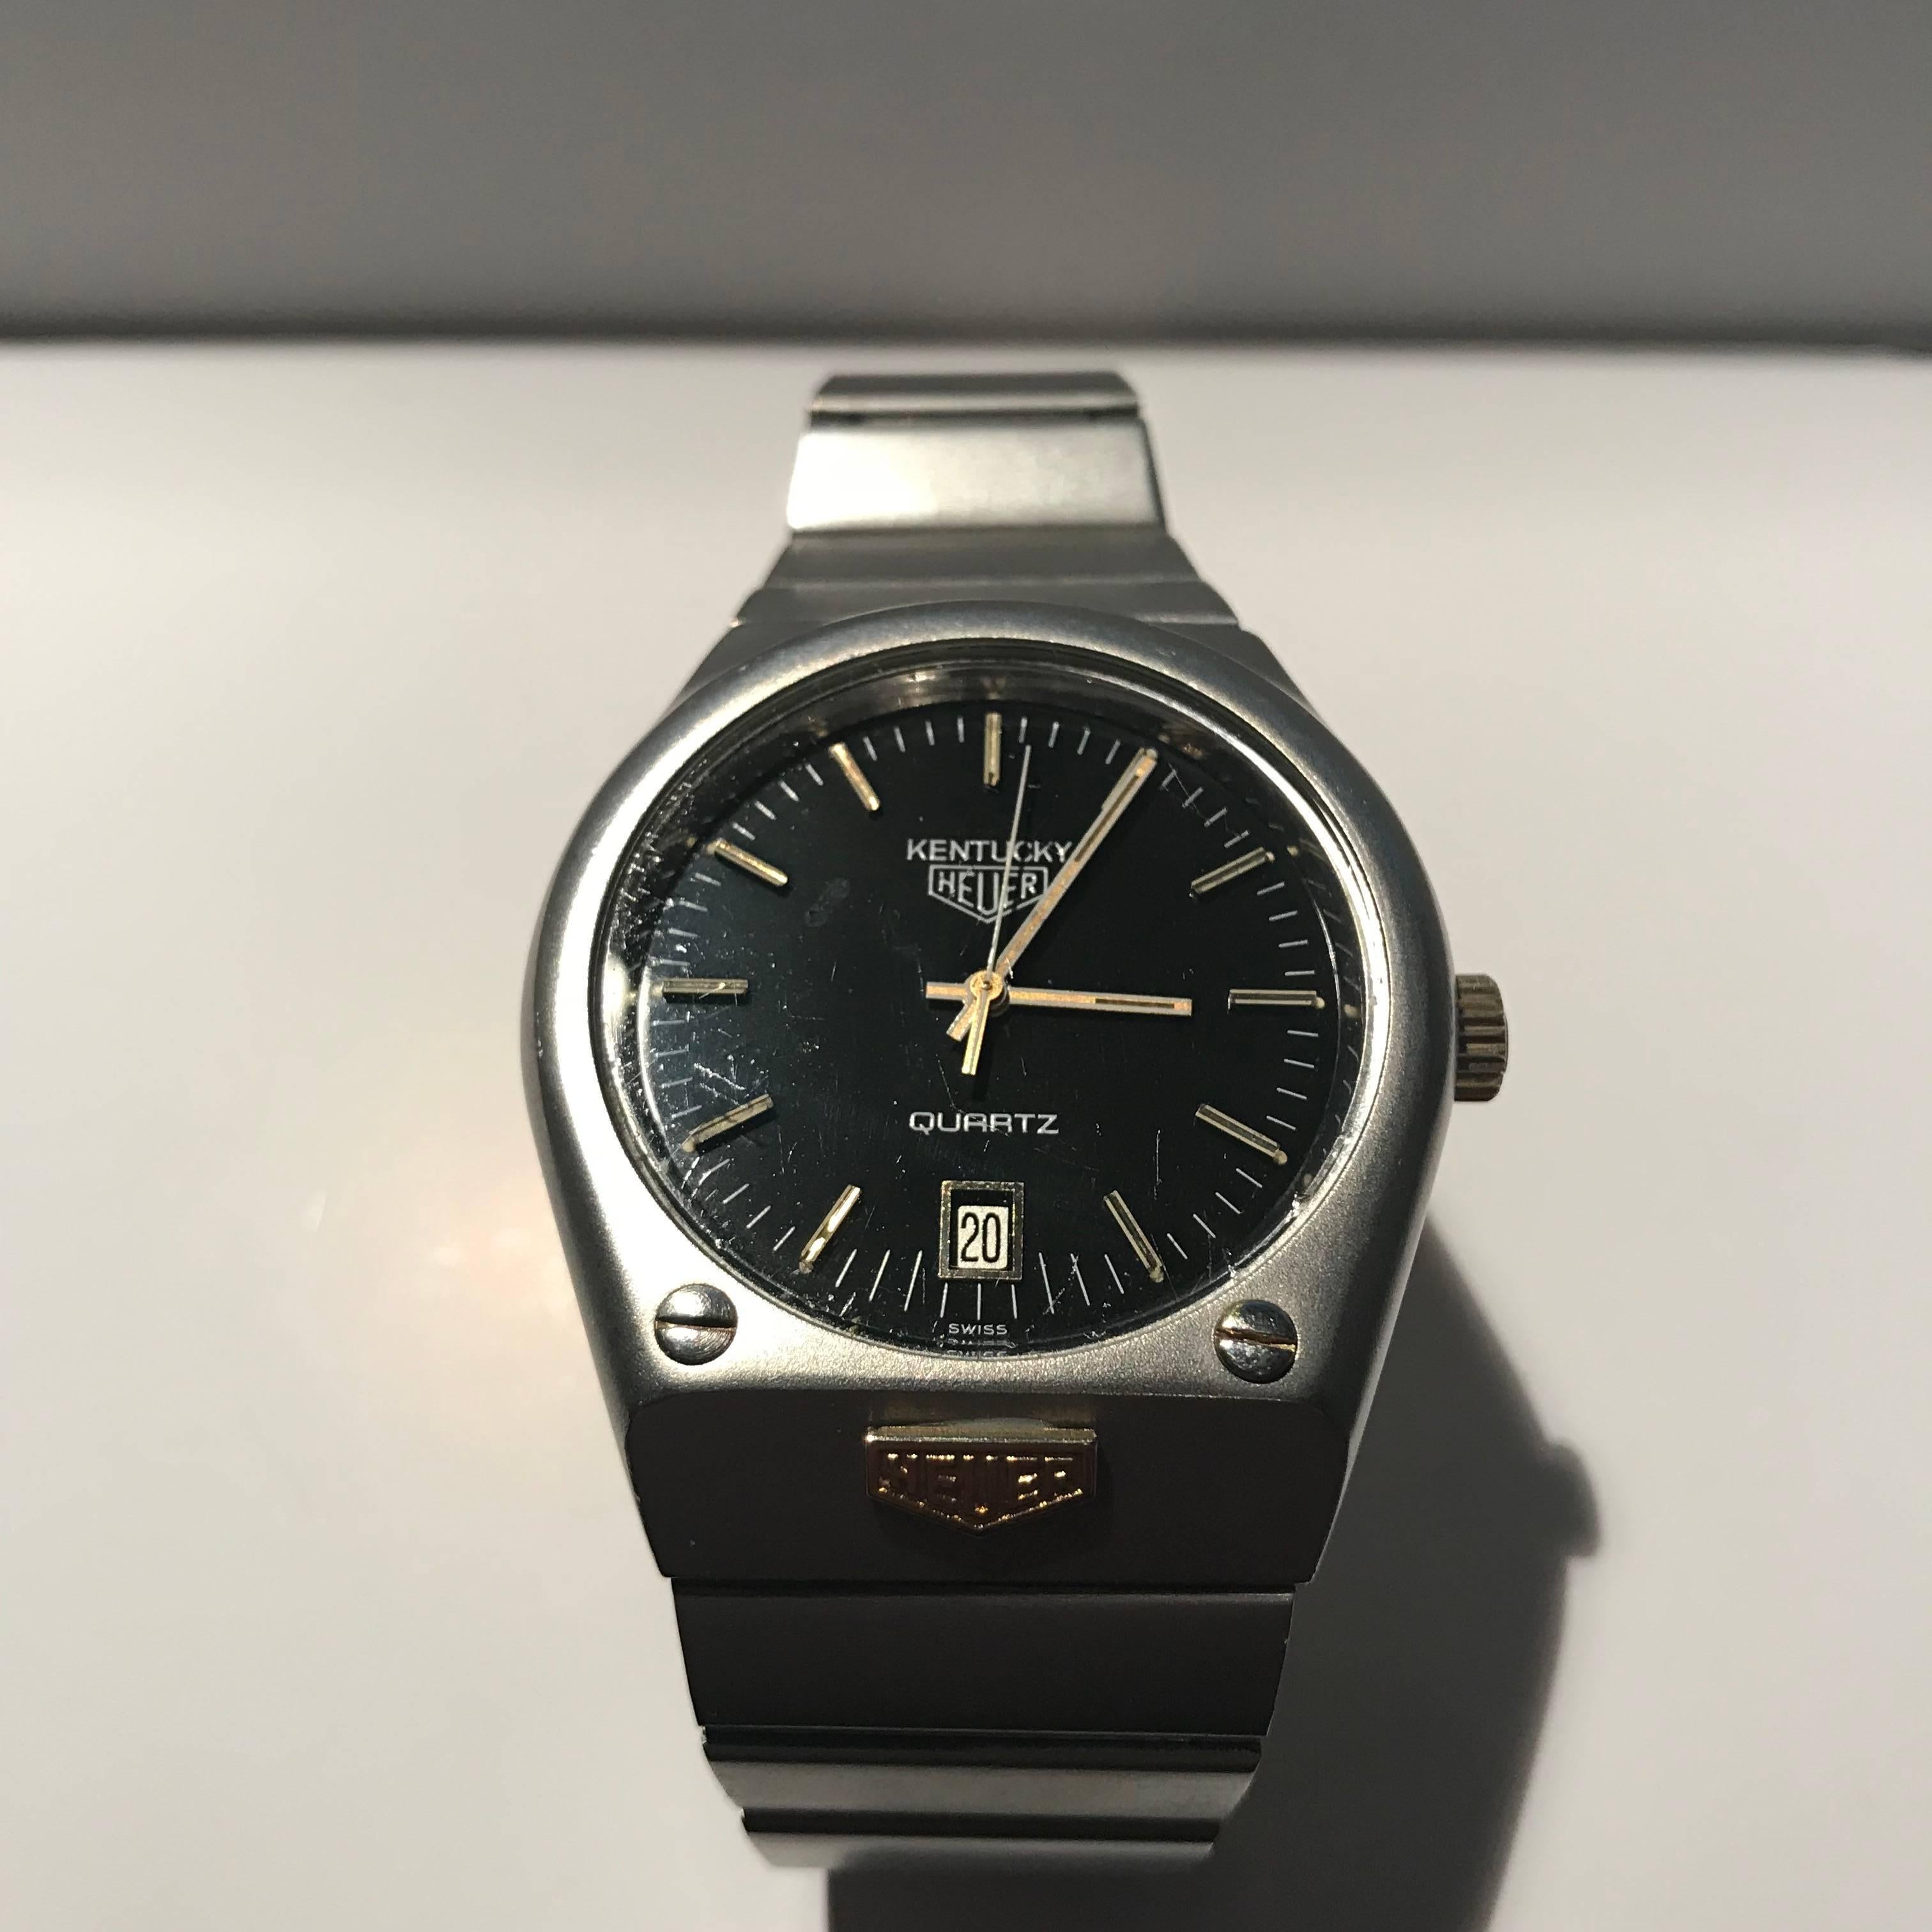 Beautiful and rare Heuer Kentucky
steel/bracelet steel/steel
black dial
date at 6 o' clock
black dial
quartz
Heuer coat of arms on bracelet
rare watch from the Heuer period (pre Tag Heuer)
excellent condition
1 year warranty
Sending neatly